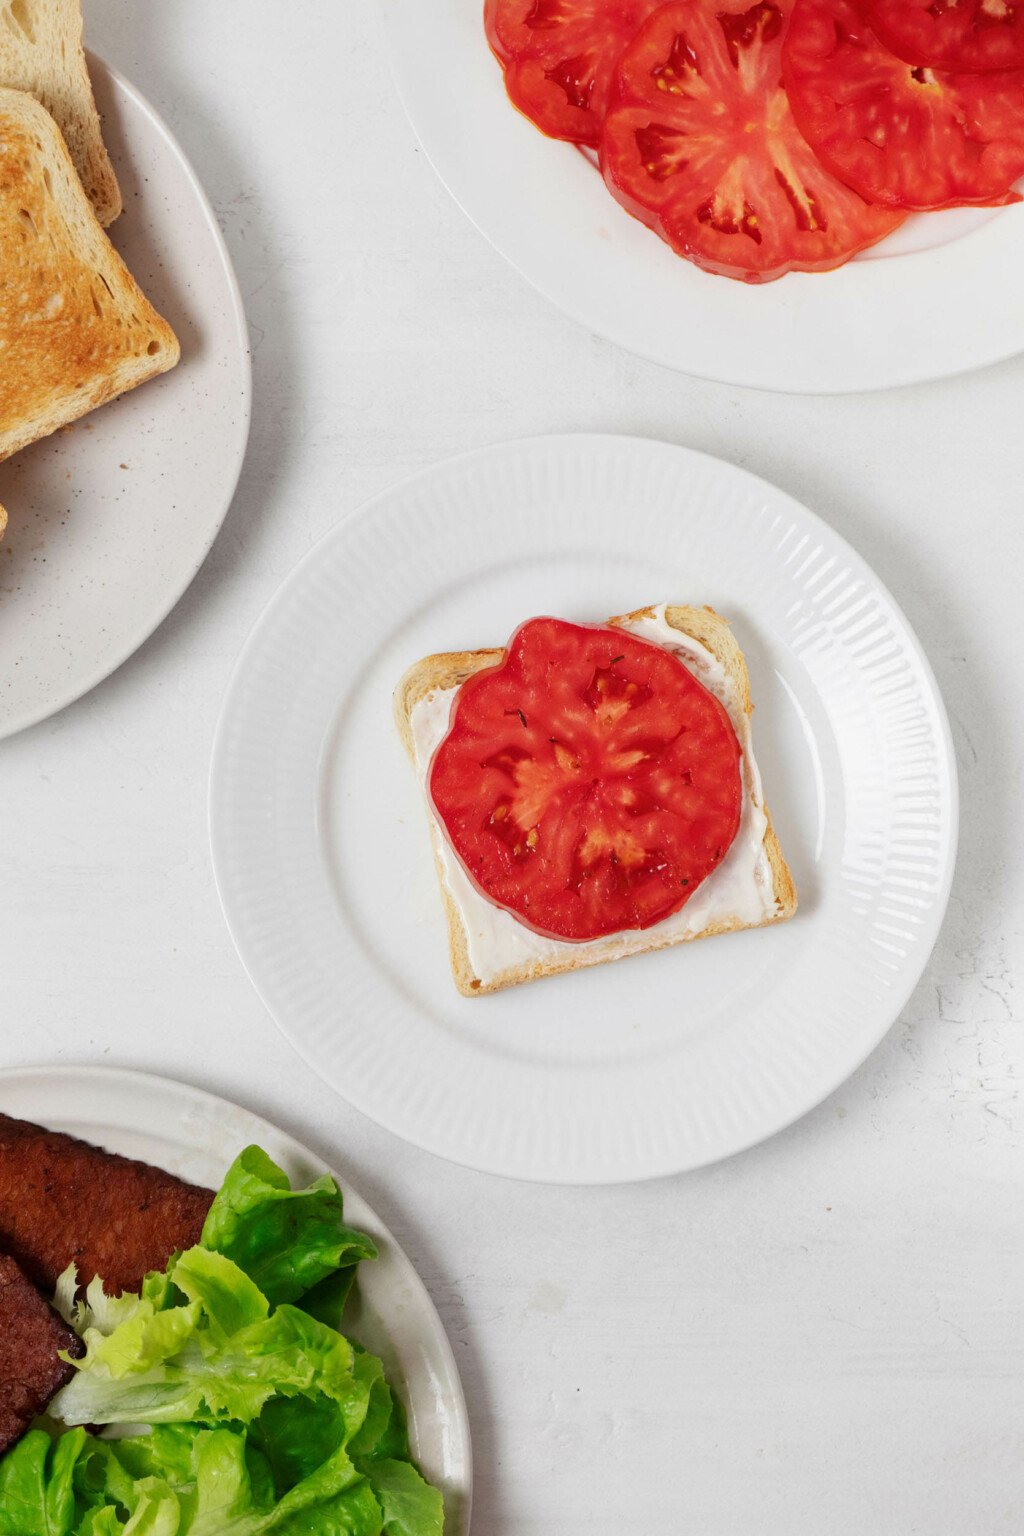 A slice of toast has been topped with a single, round slice of tomato and mayonnaise. It's served on a small white plate.